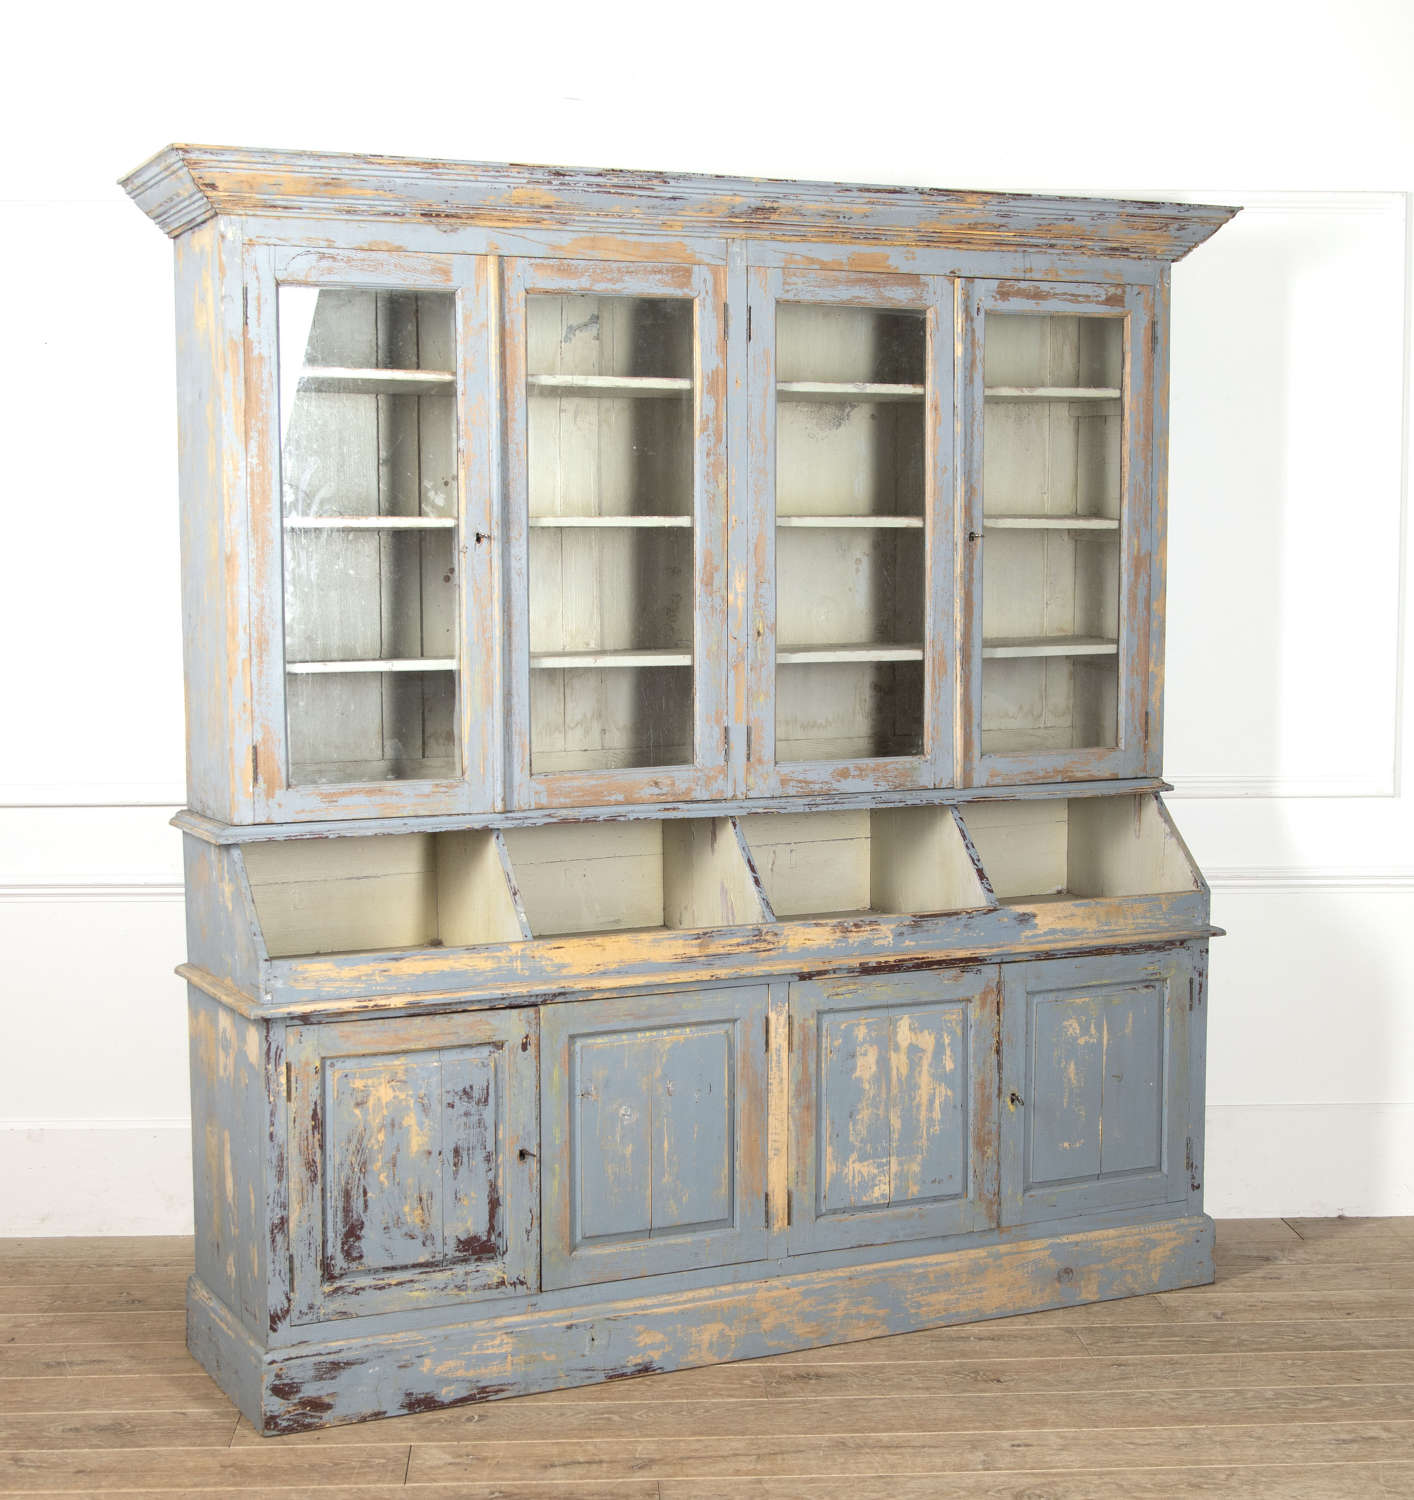 19th c French Painted Dresser from a Grocery Shop - circa 1890